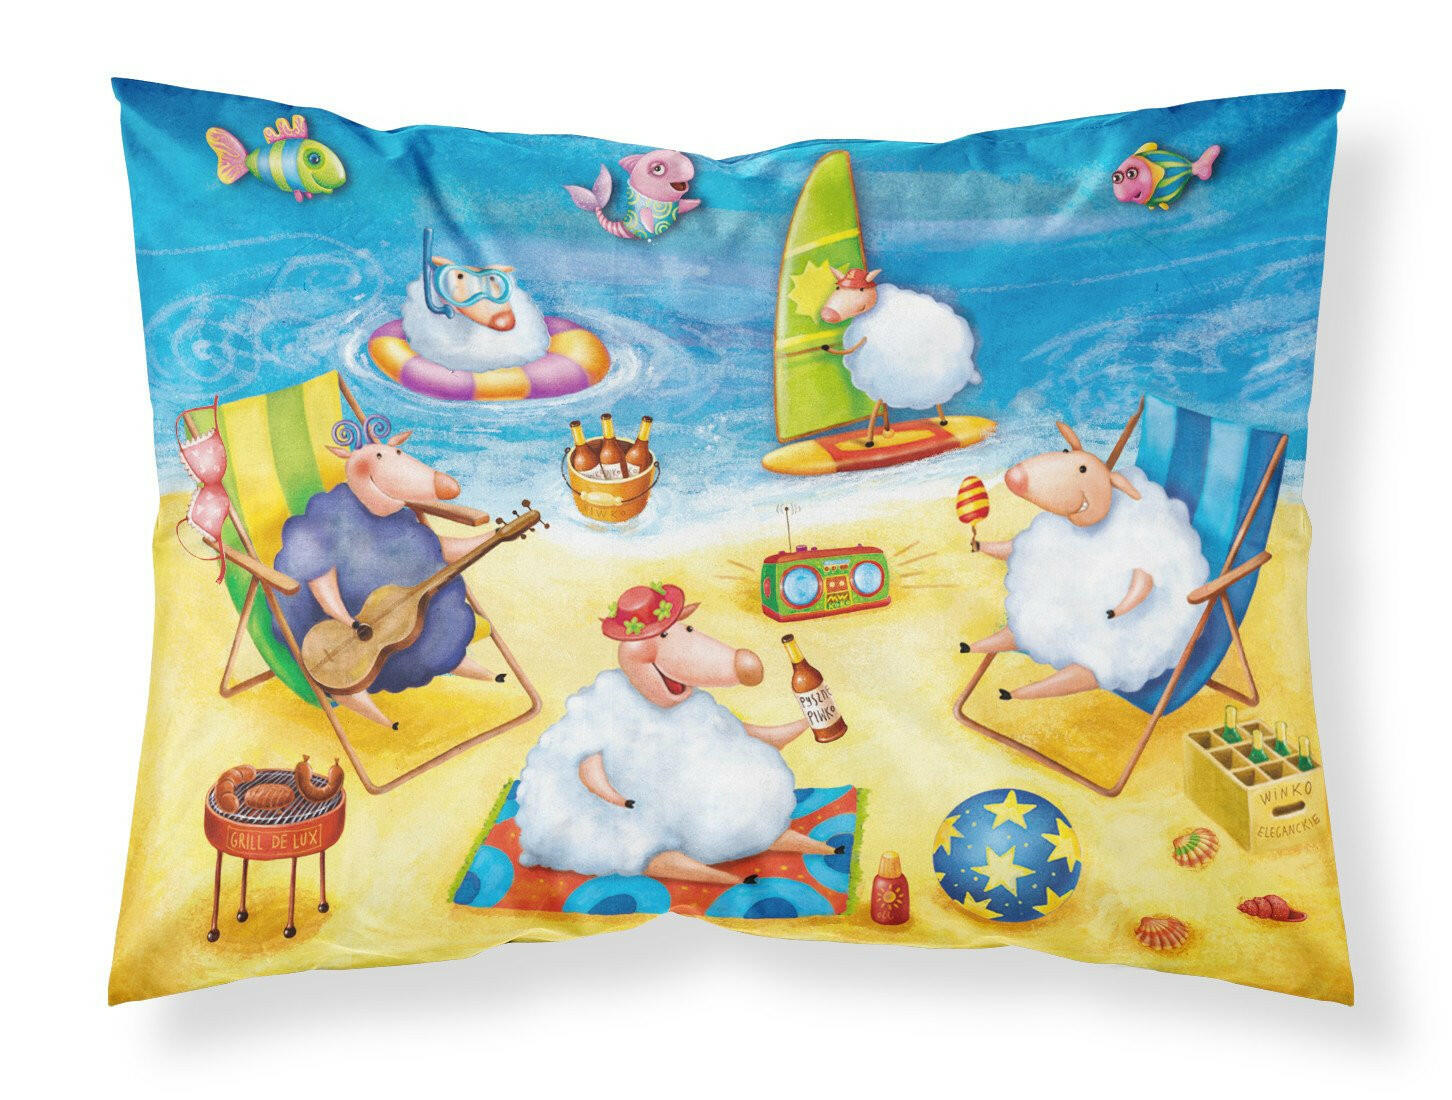 Party Pigs on the Beach Fabric Standard Pillowcase APH0081PILLOWCASE by Caroline's Treasures